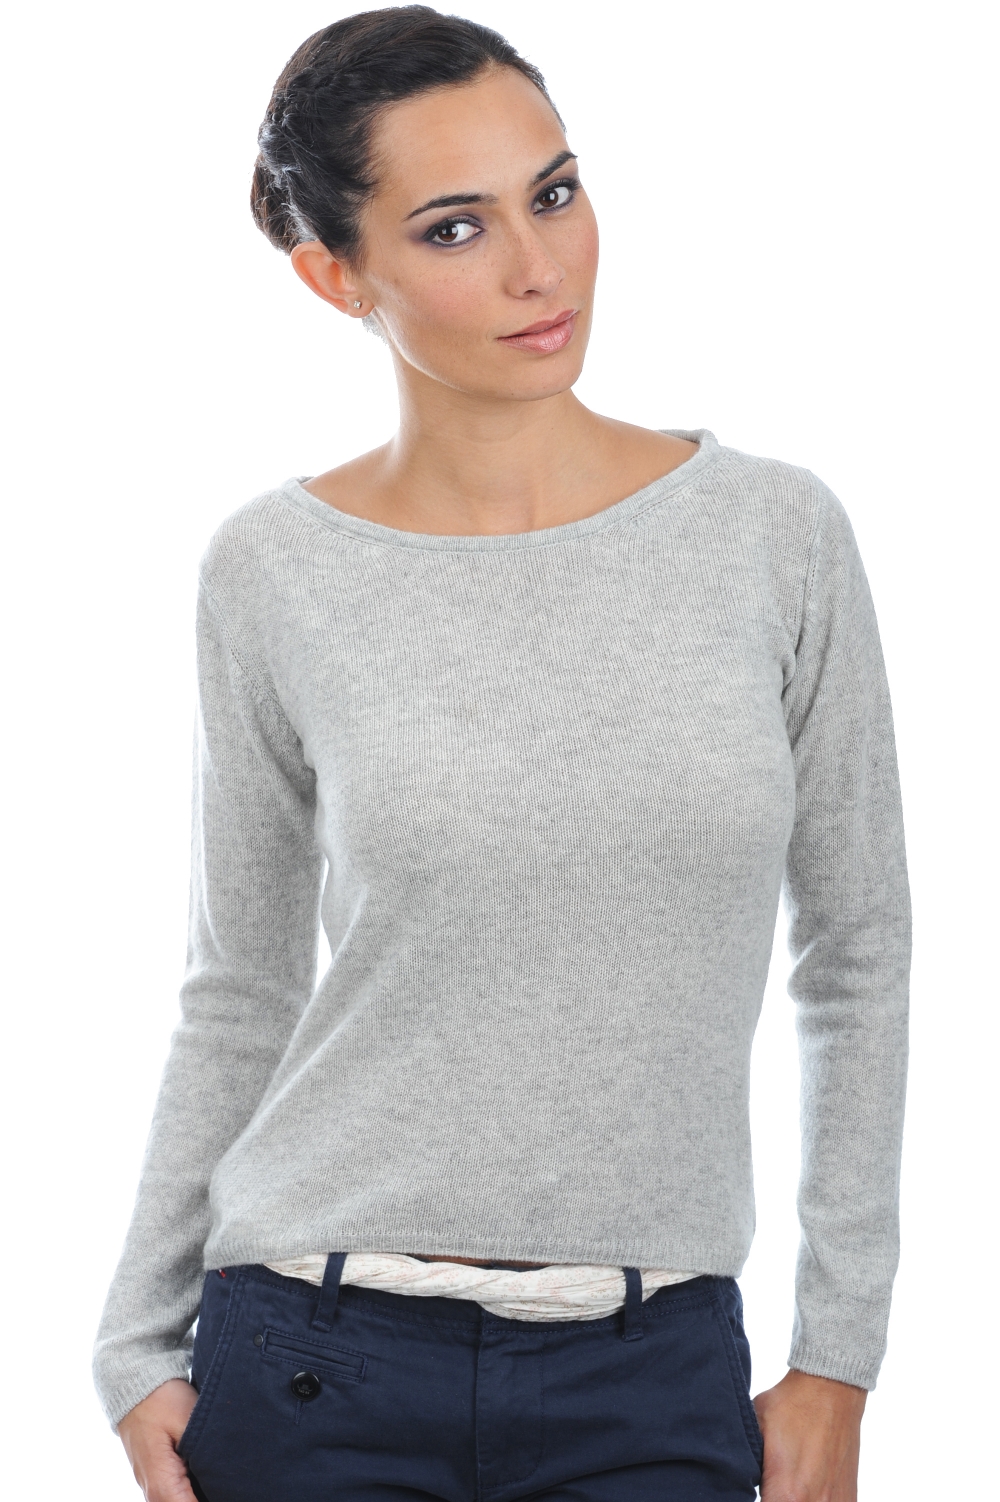 Cashmere ladies basic sweaters at low prices caleen flanelle chine xl